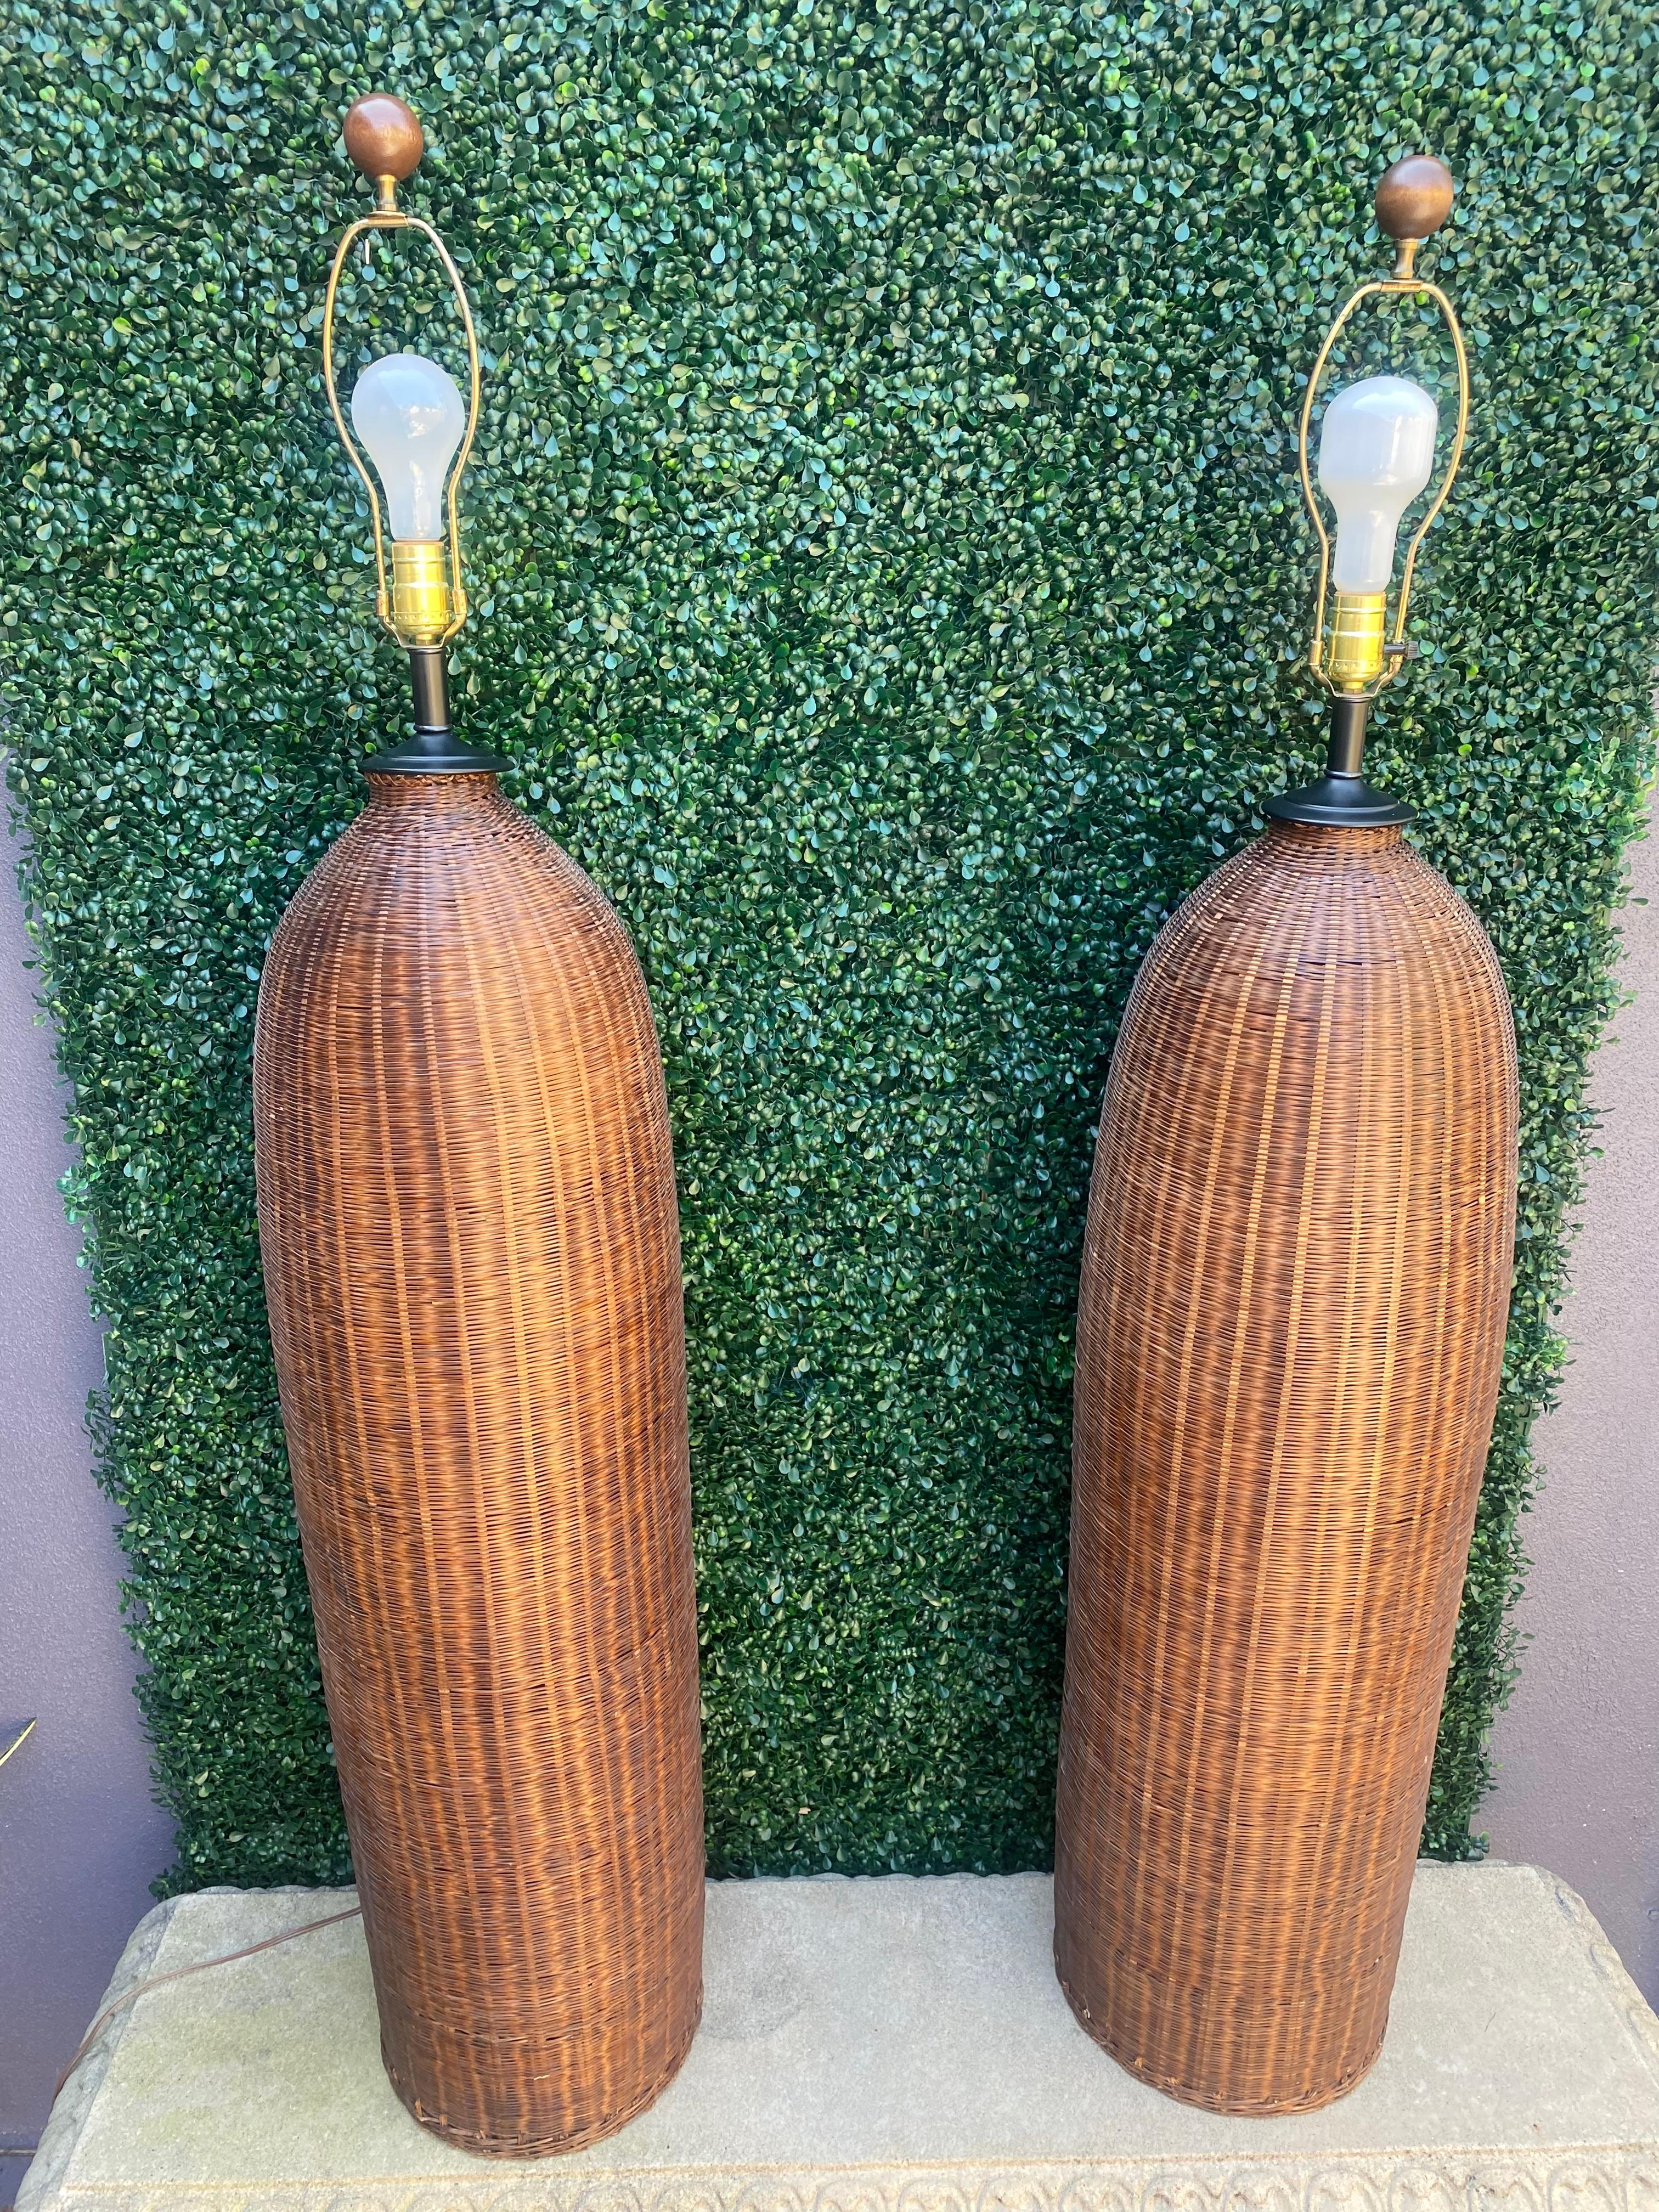 1970s Fine Rattan Wicker Vessel Floor Lamps With Shades, Set of 2 In Excellent Condition For Sale In Fort Lauderdale, FL